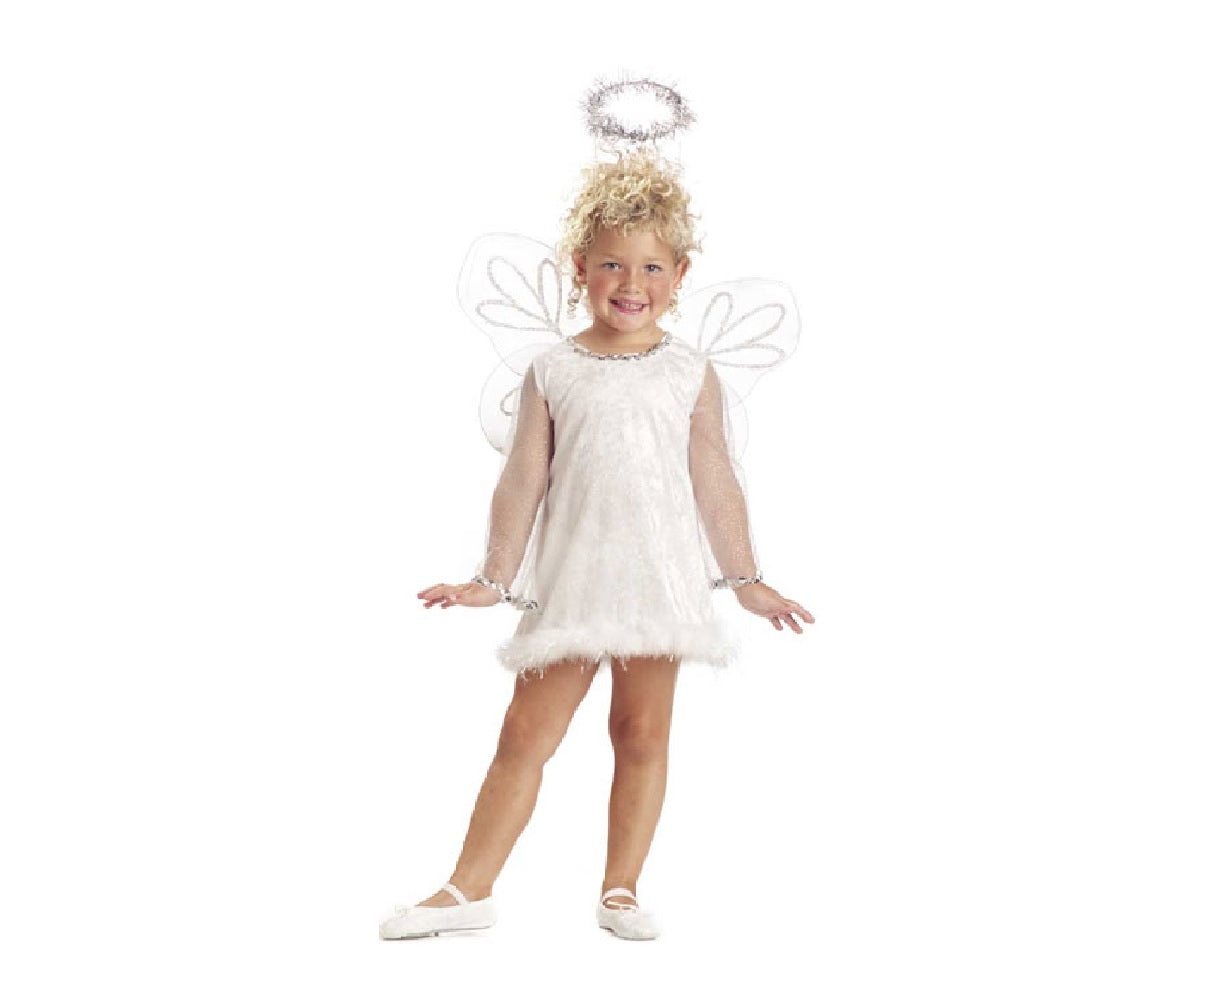 Dream Angel - Wings - Halo - Easter Christmas - Costume - Toddler 2-4T